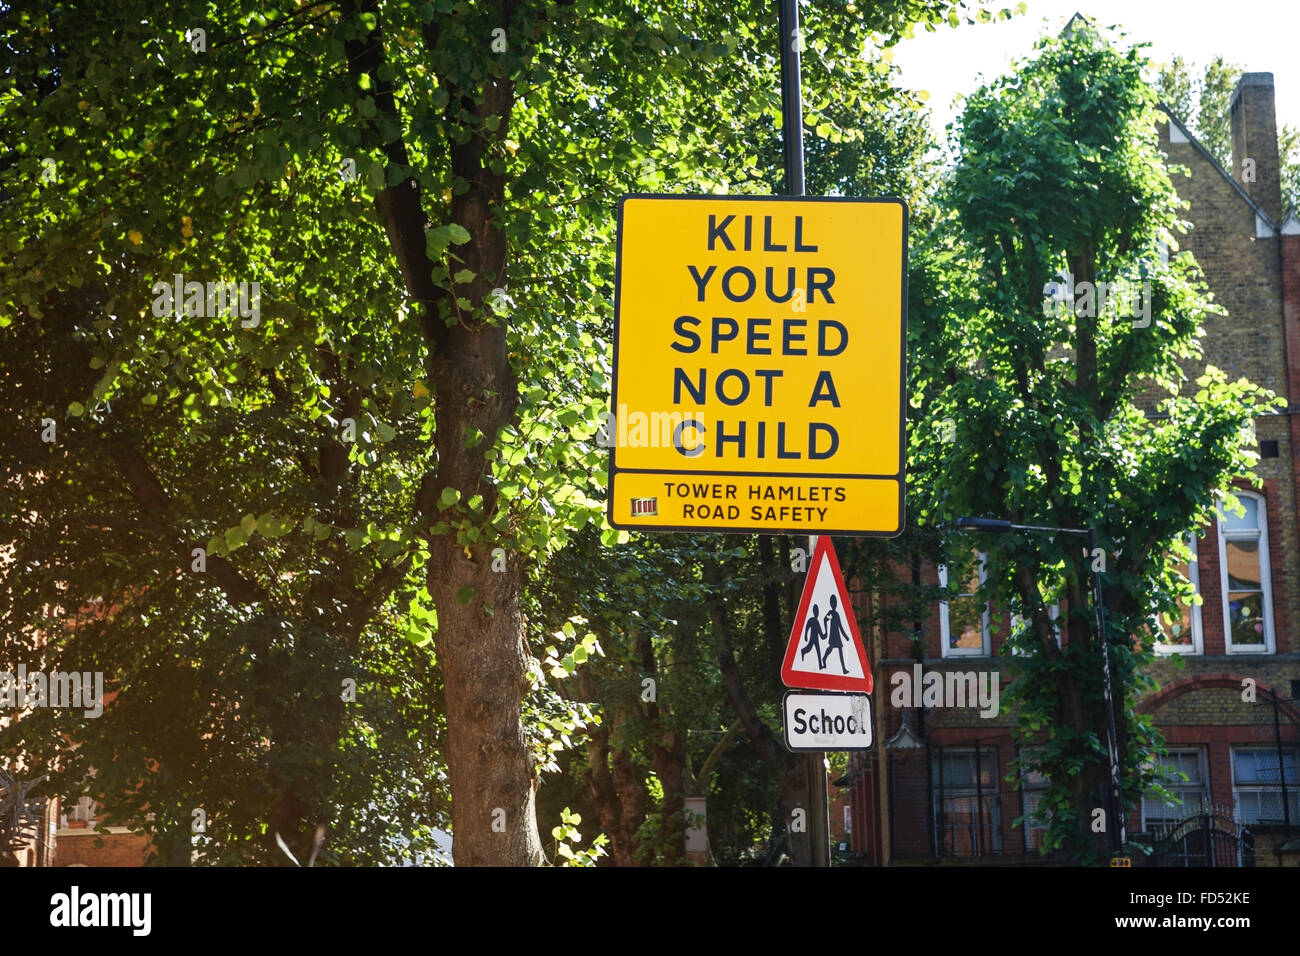 Road sign: “kill your speed not a child”, Tower Hamlets Road Safety, London, UK Stock Photo